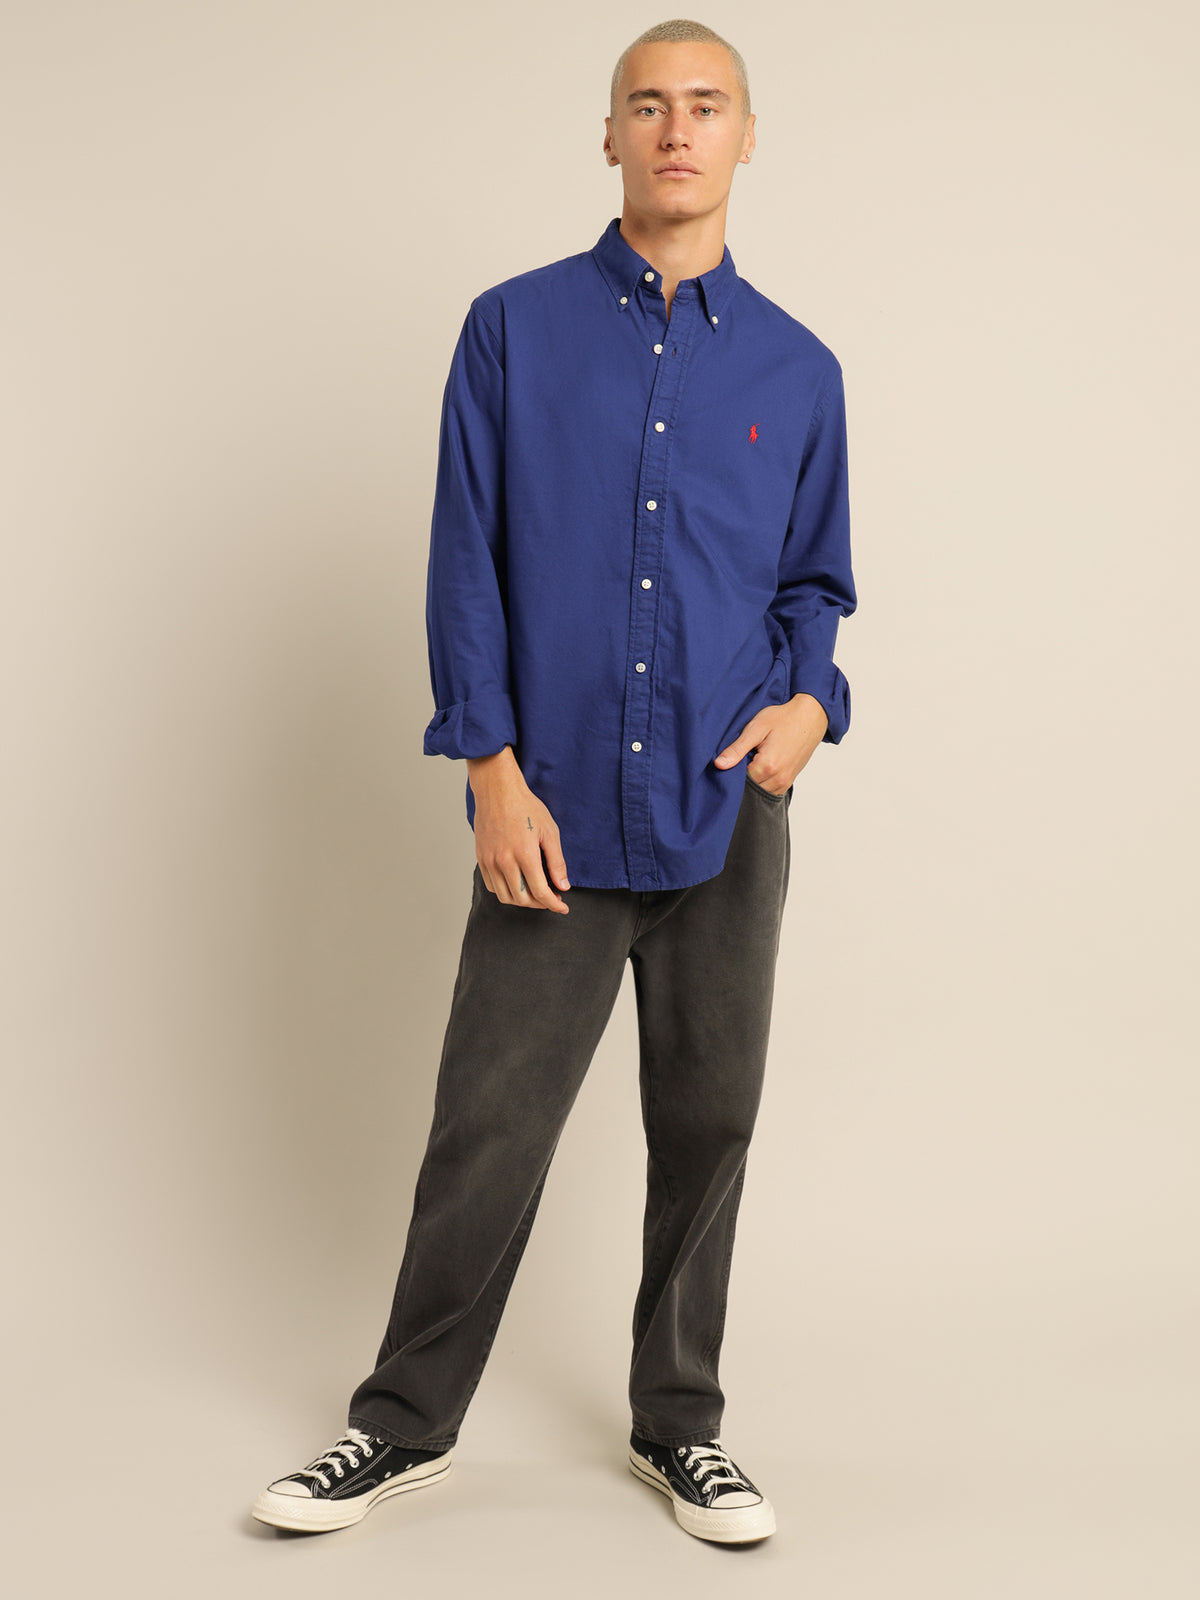 Polo Custom Fit Oxford Shirt in Sporting Royal